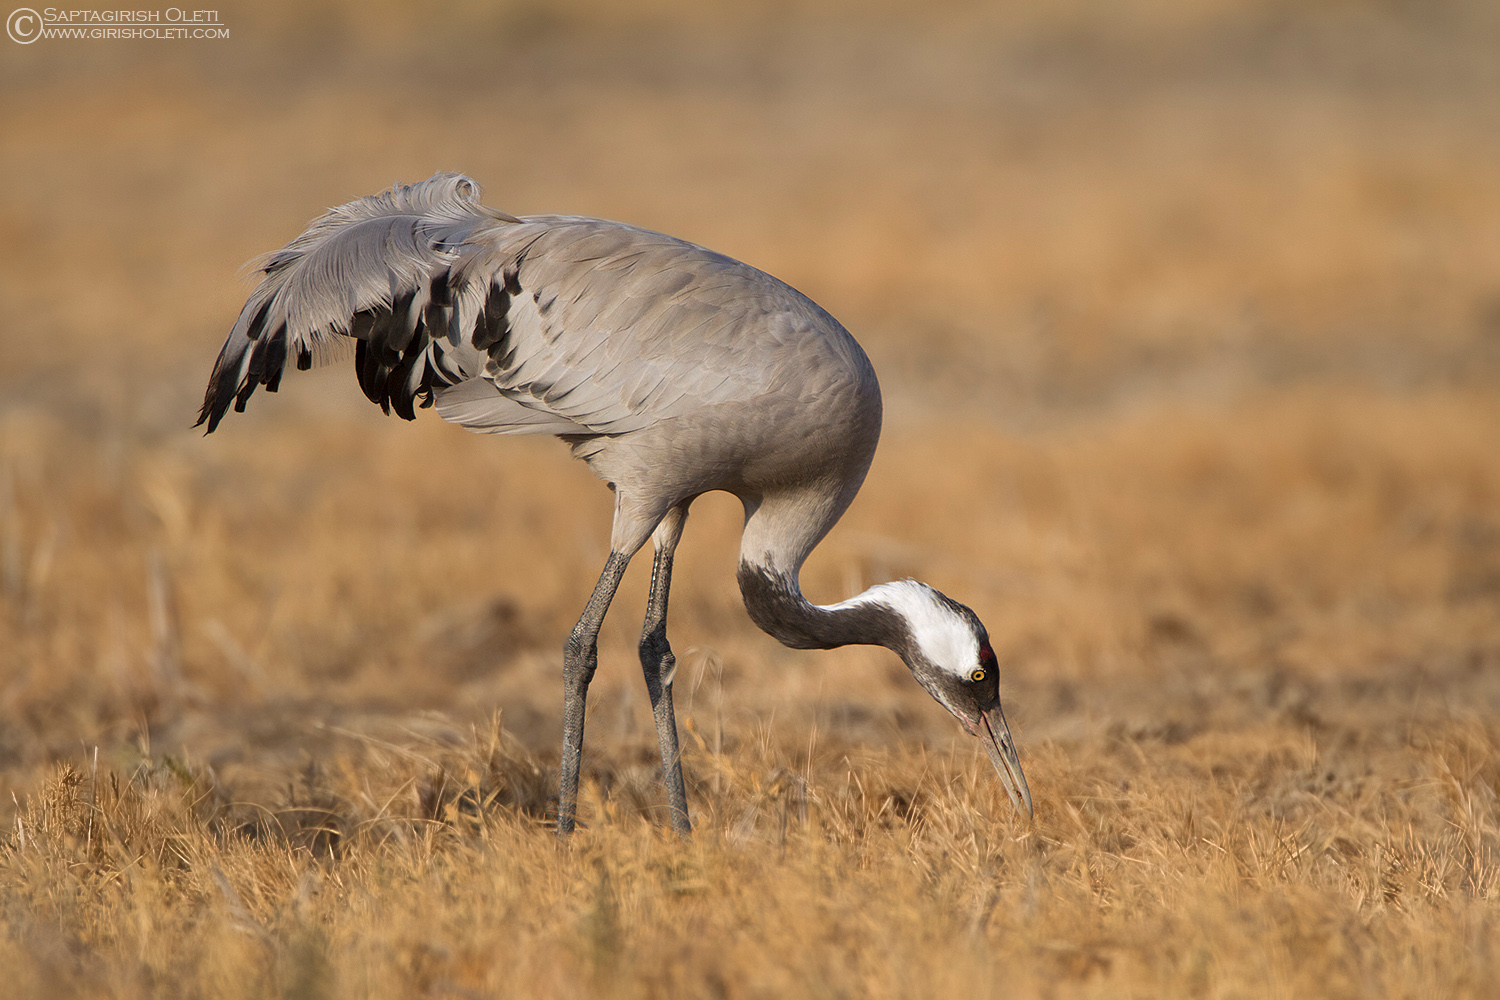 Common Crane photographed at Little Rann of Kutch